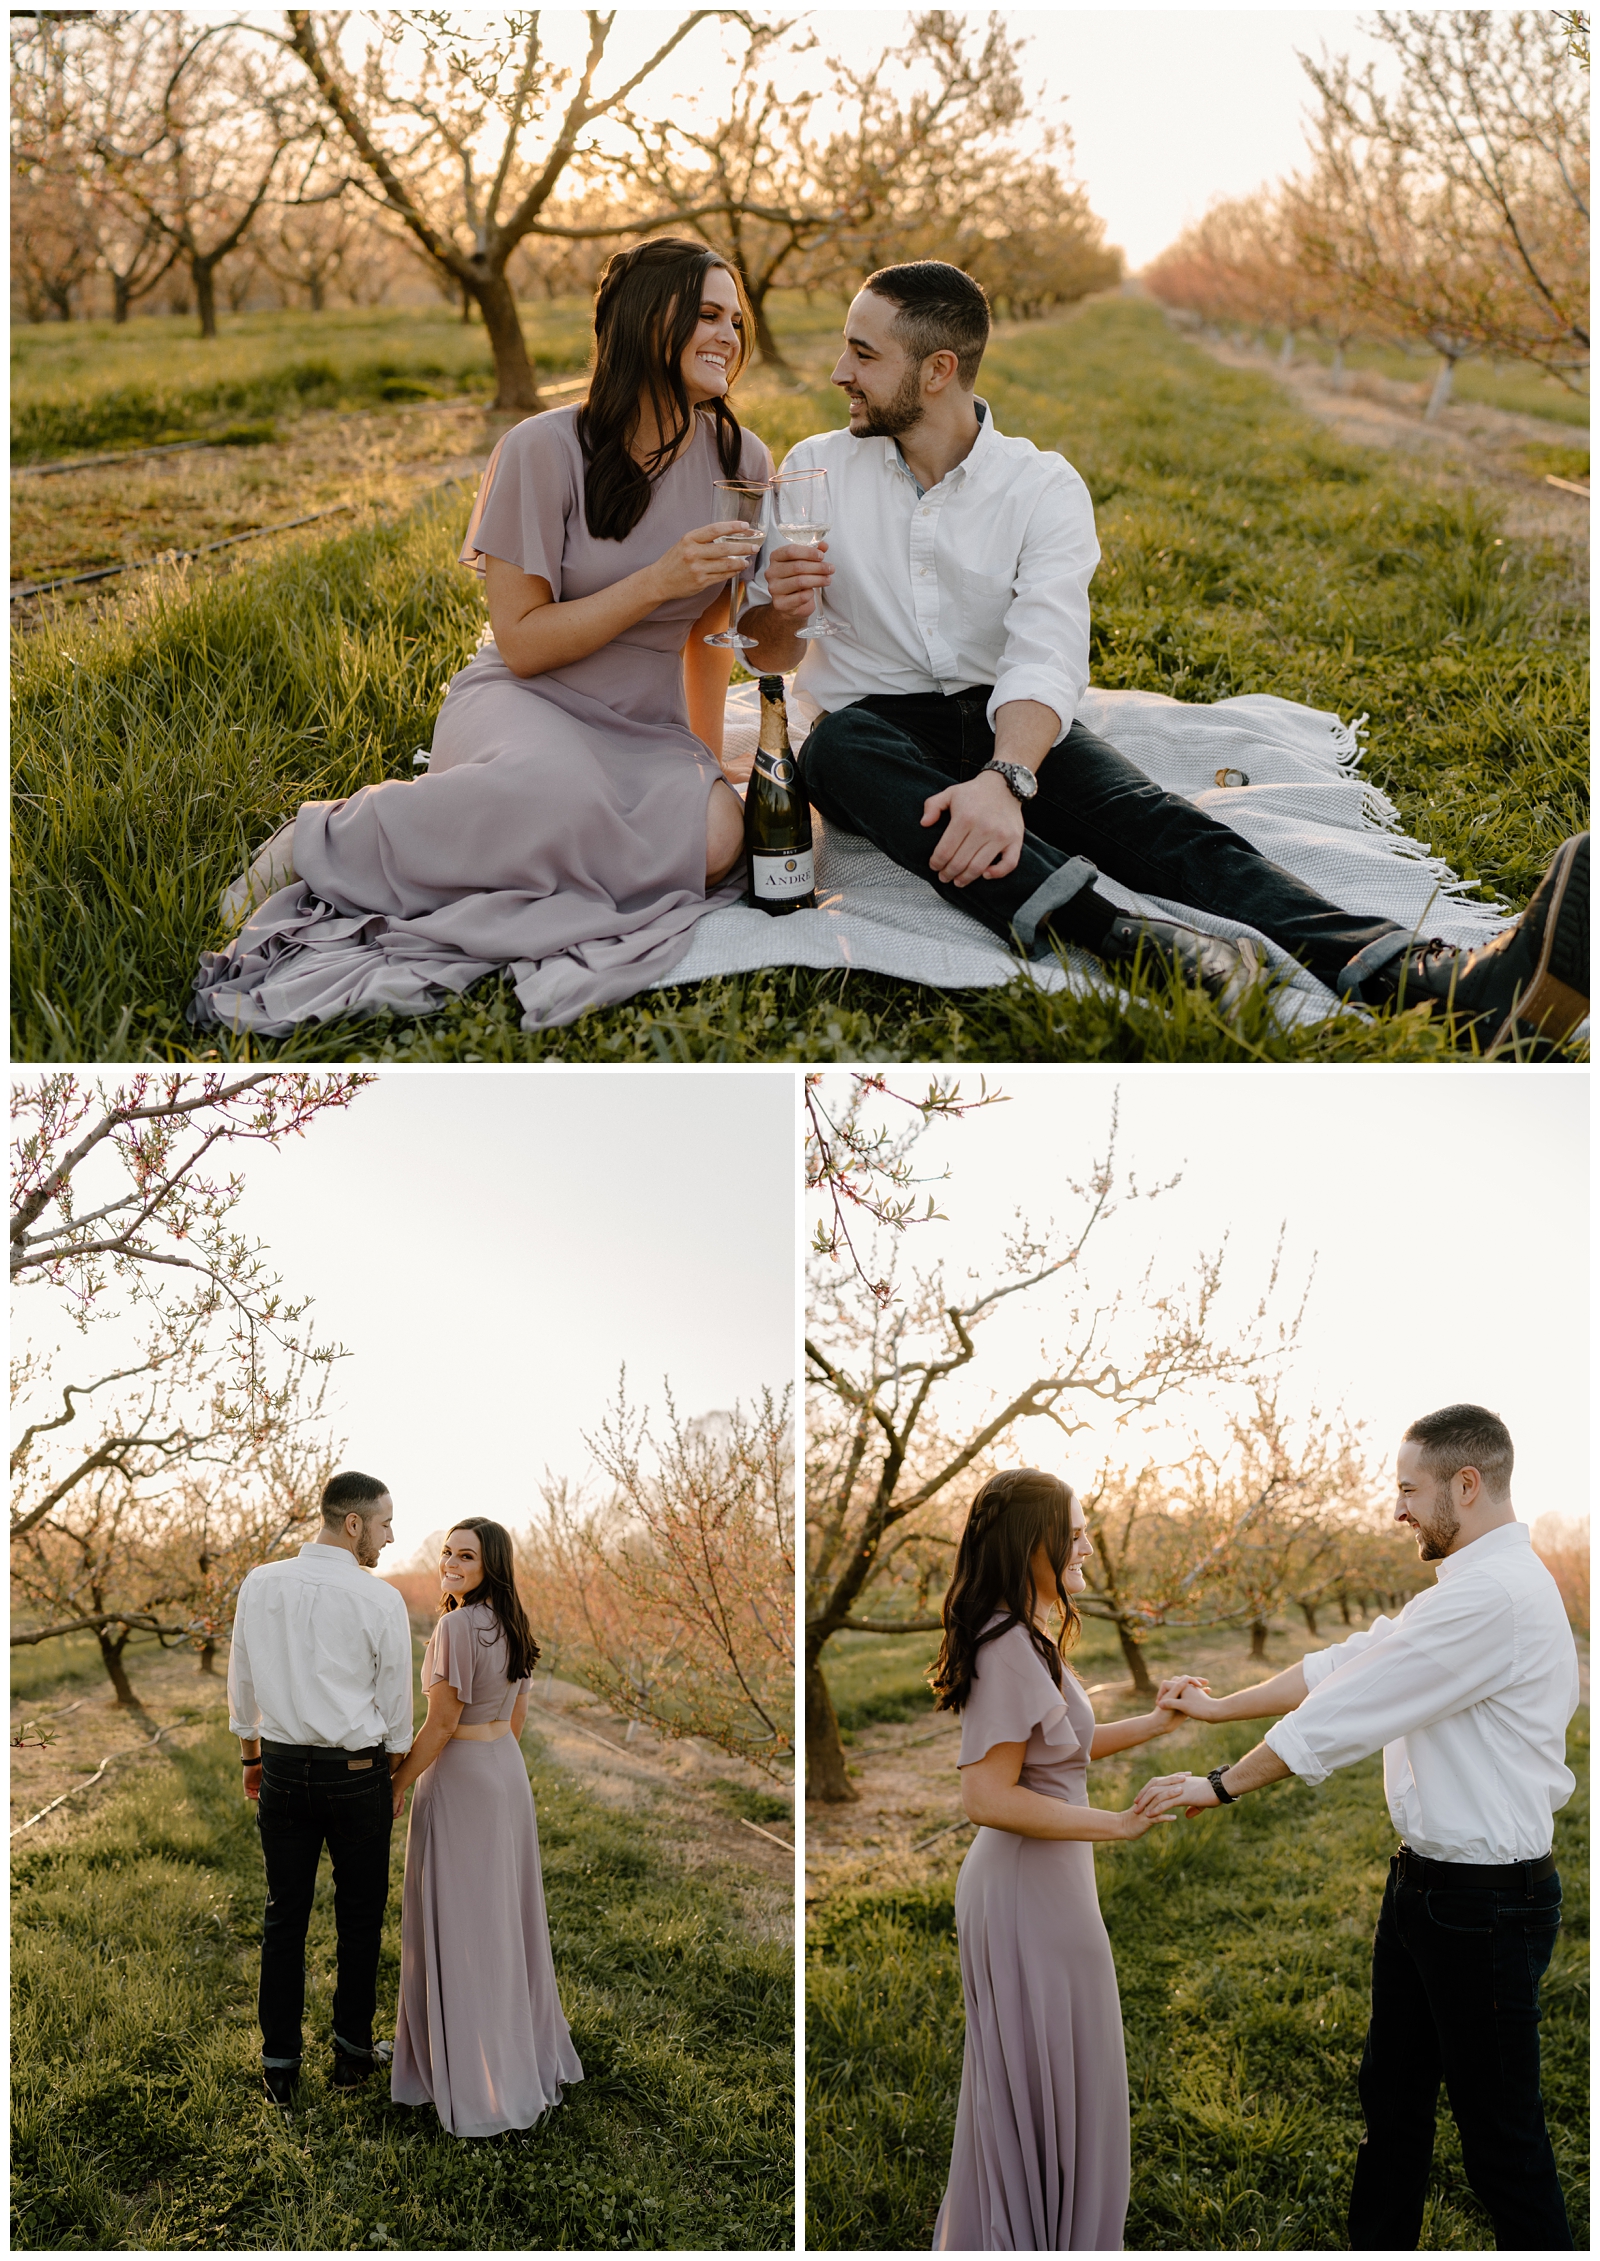 Picnic in a cherry blossoms field for their engagement session by North Carolina photographer